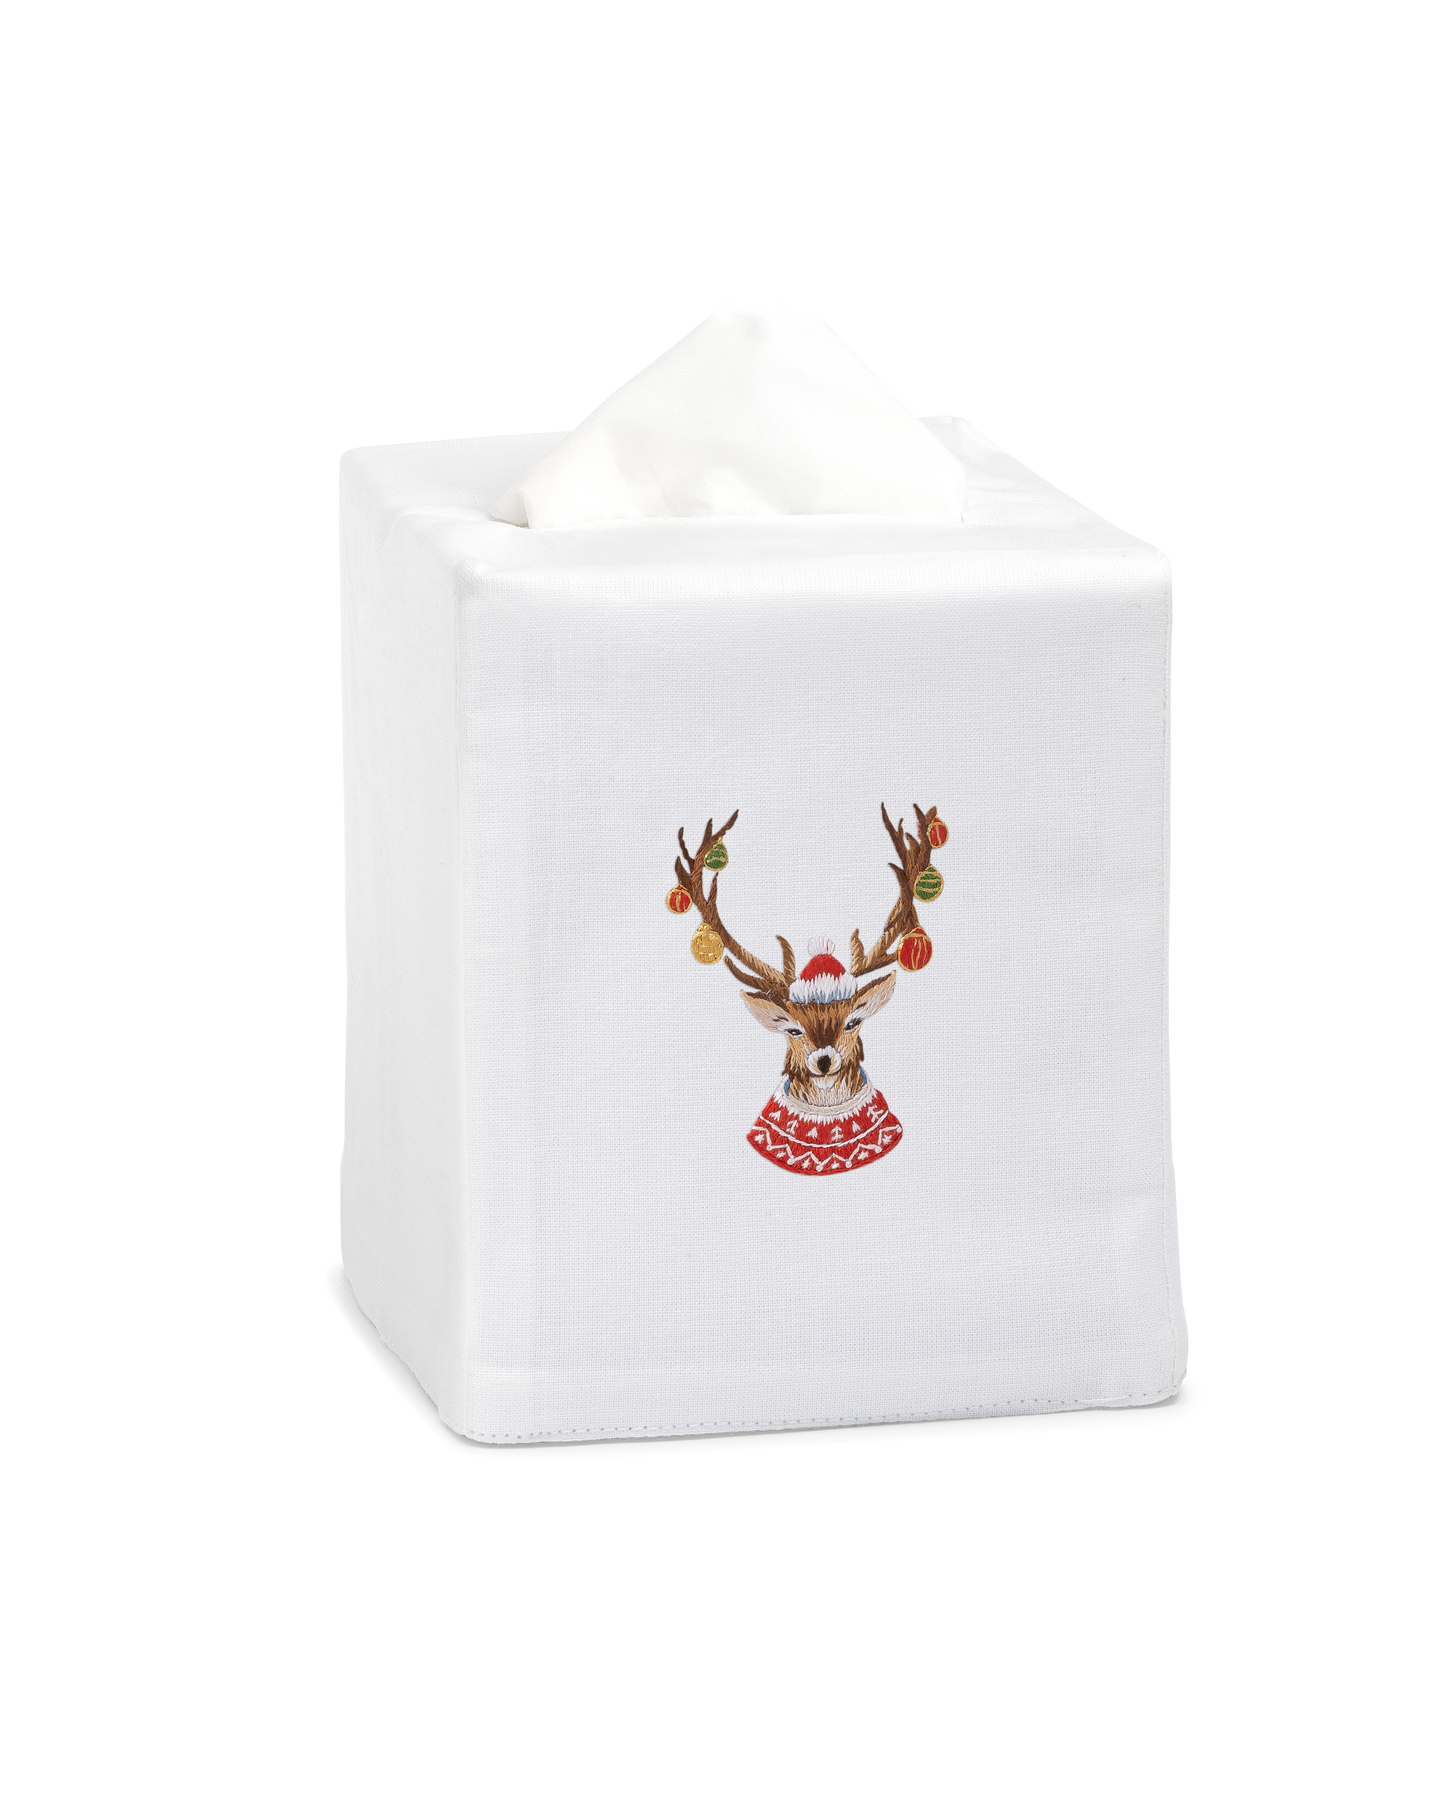 A white tissue cover with a stag with ornaments on his antlers embroidered in the center.